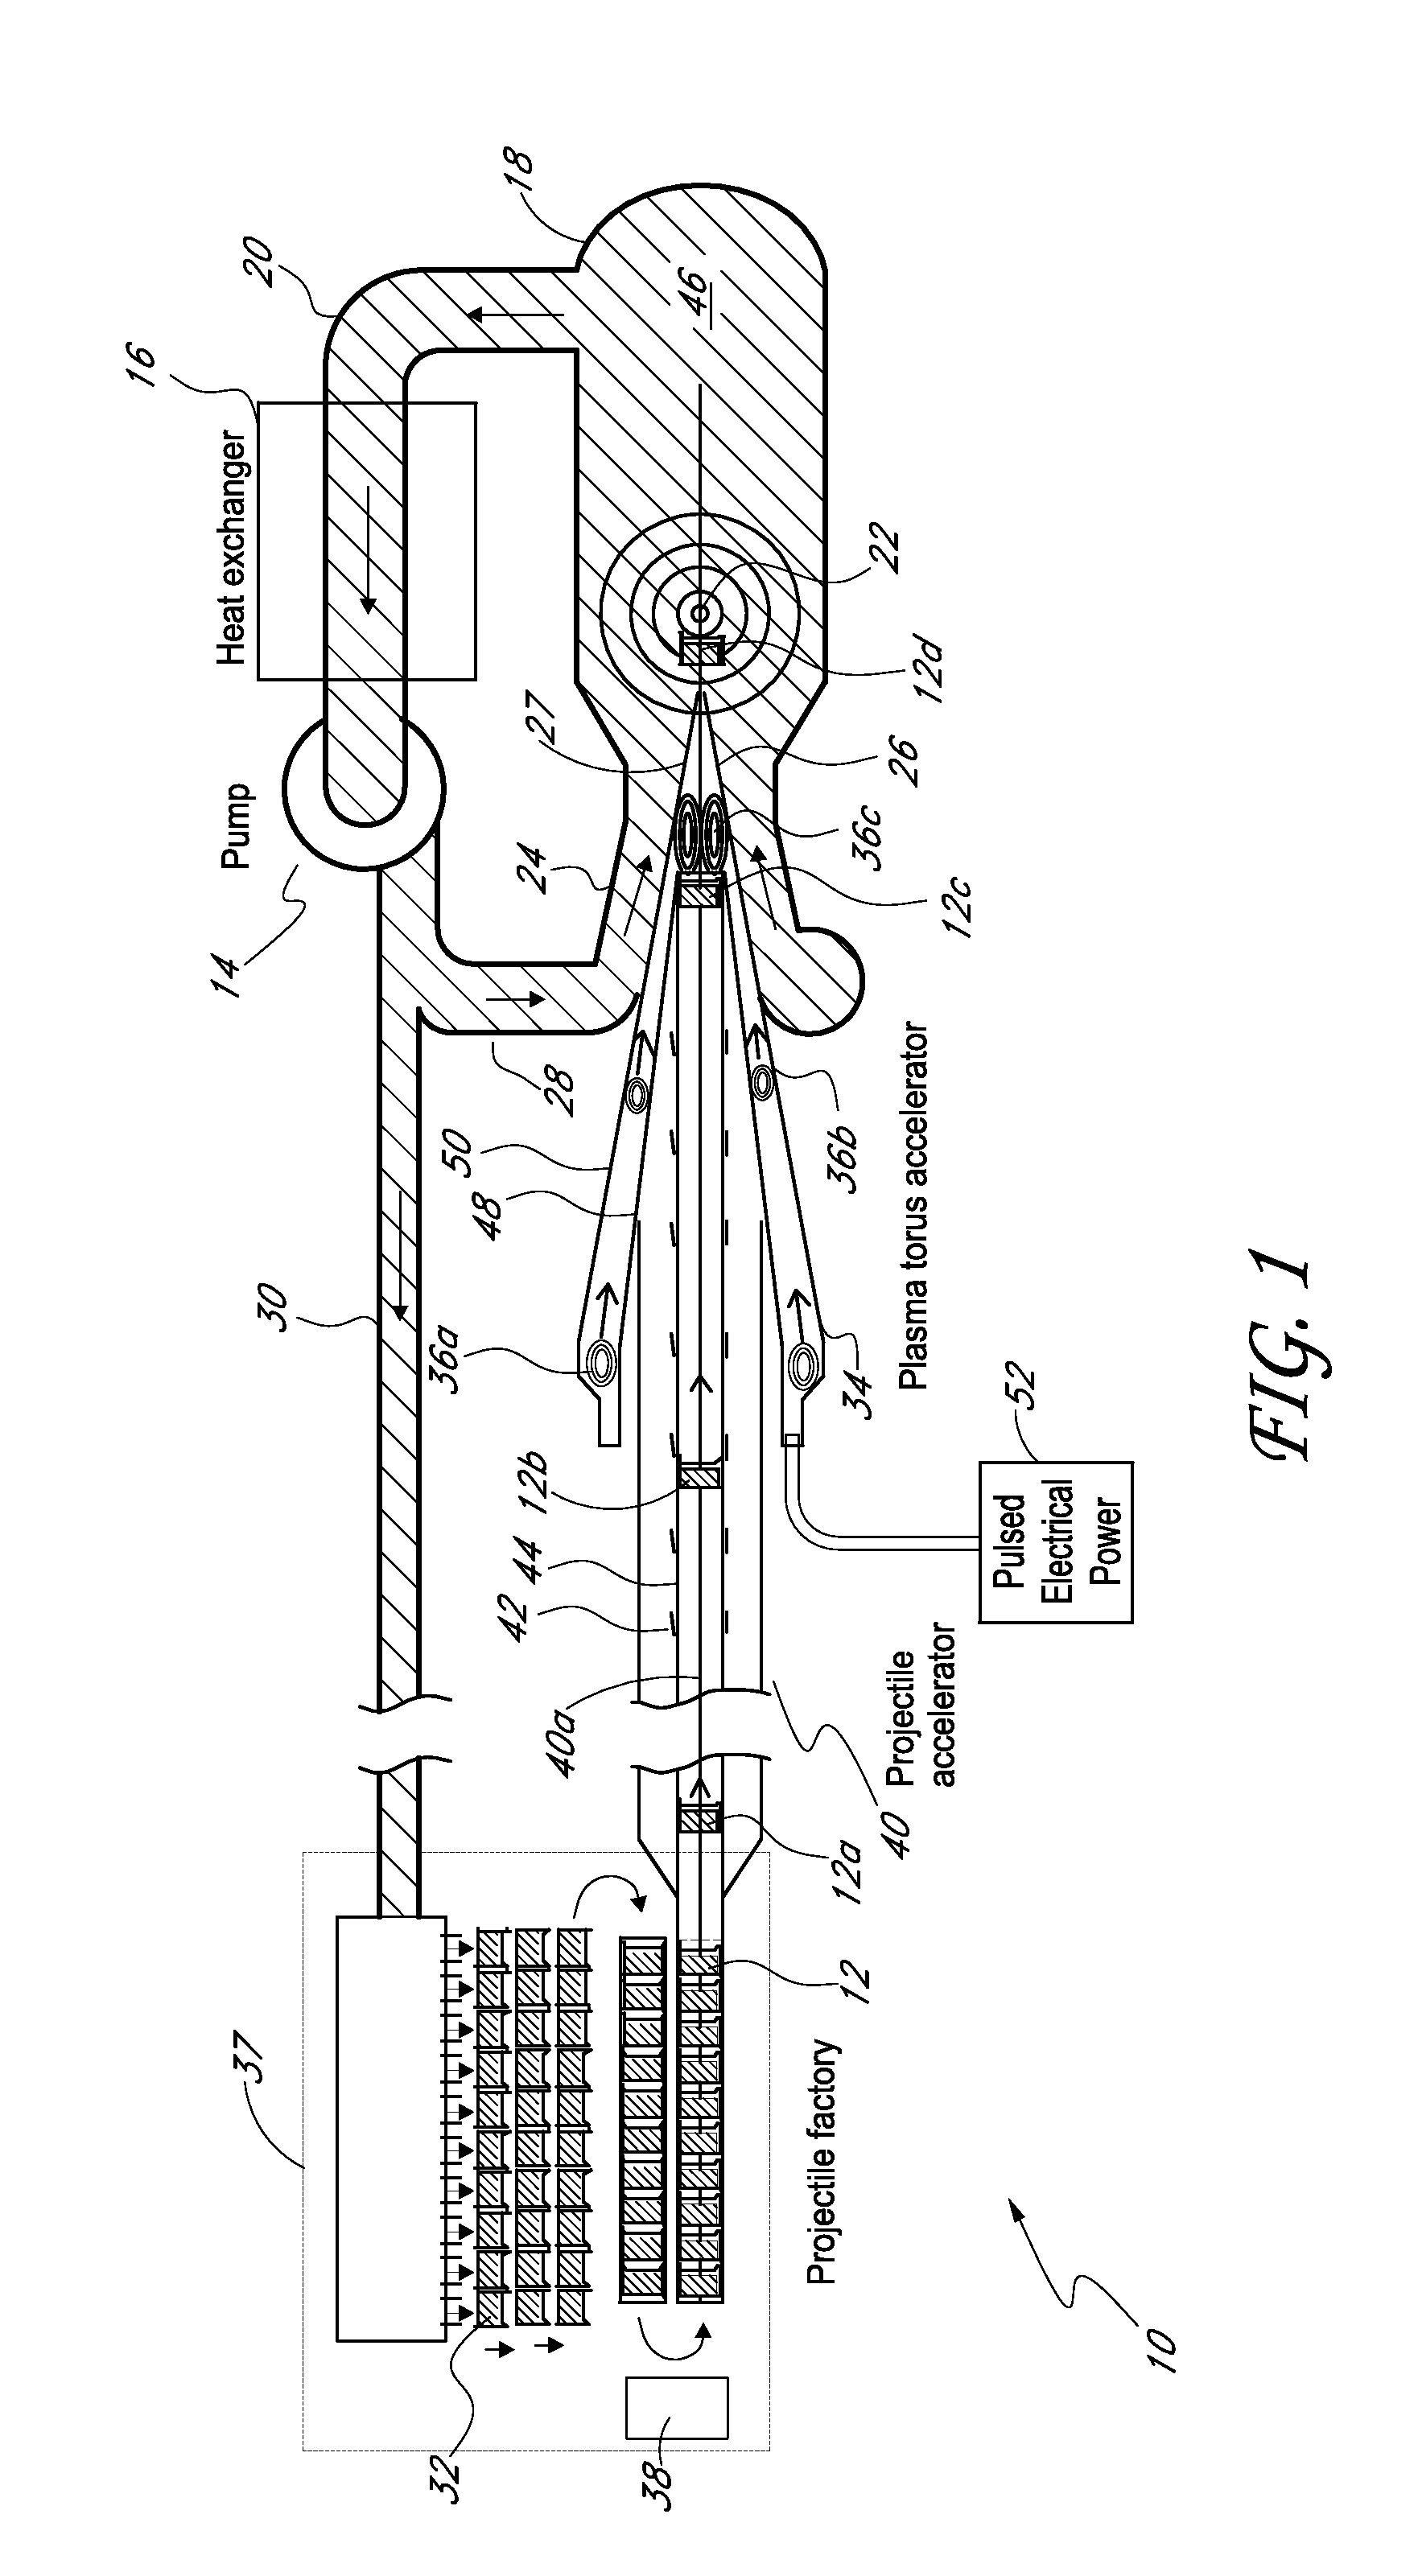 Systems and methods for plasma compression with recycling of projectiles